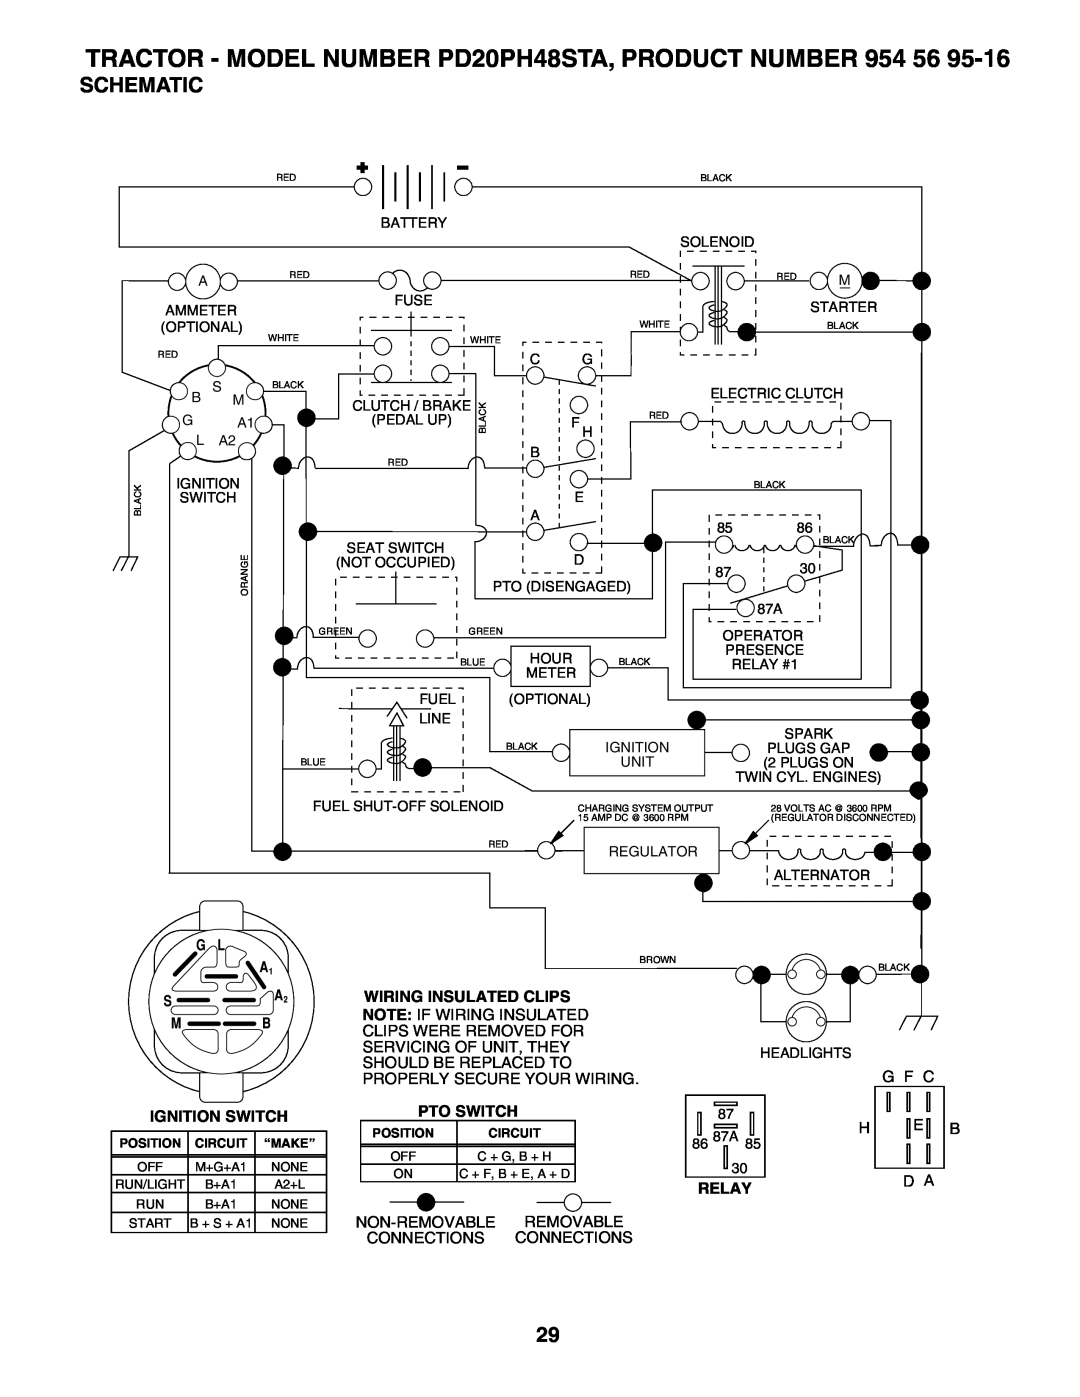 Poulan 185498, 954569516 owner manual TRACTOR - MODEL NUMBER PD20PH48STA, PRODUCT NUMBER 954 56, Schematic 